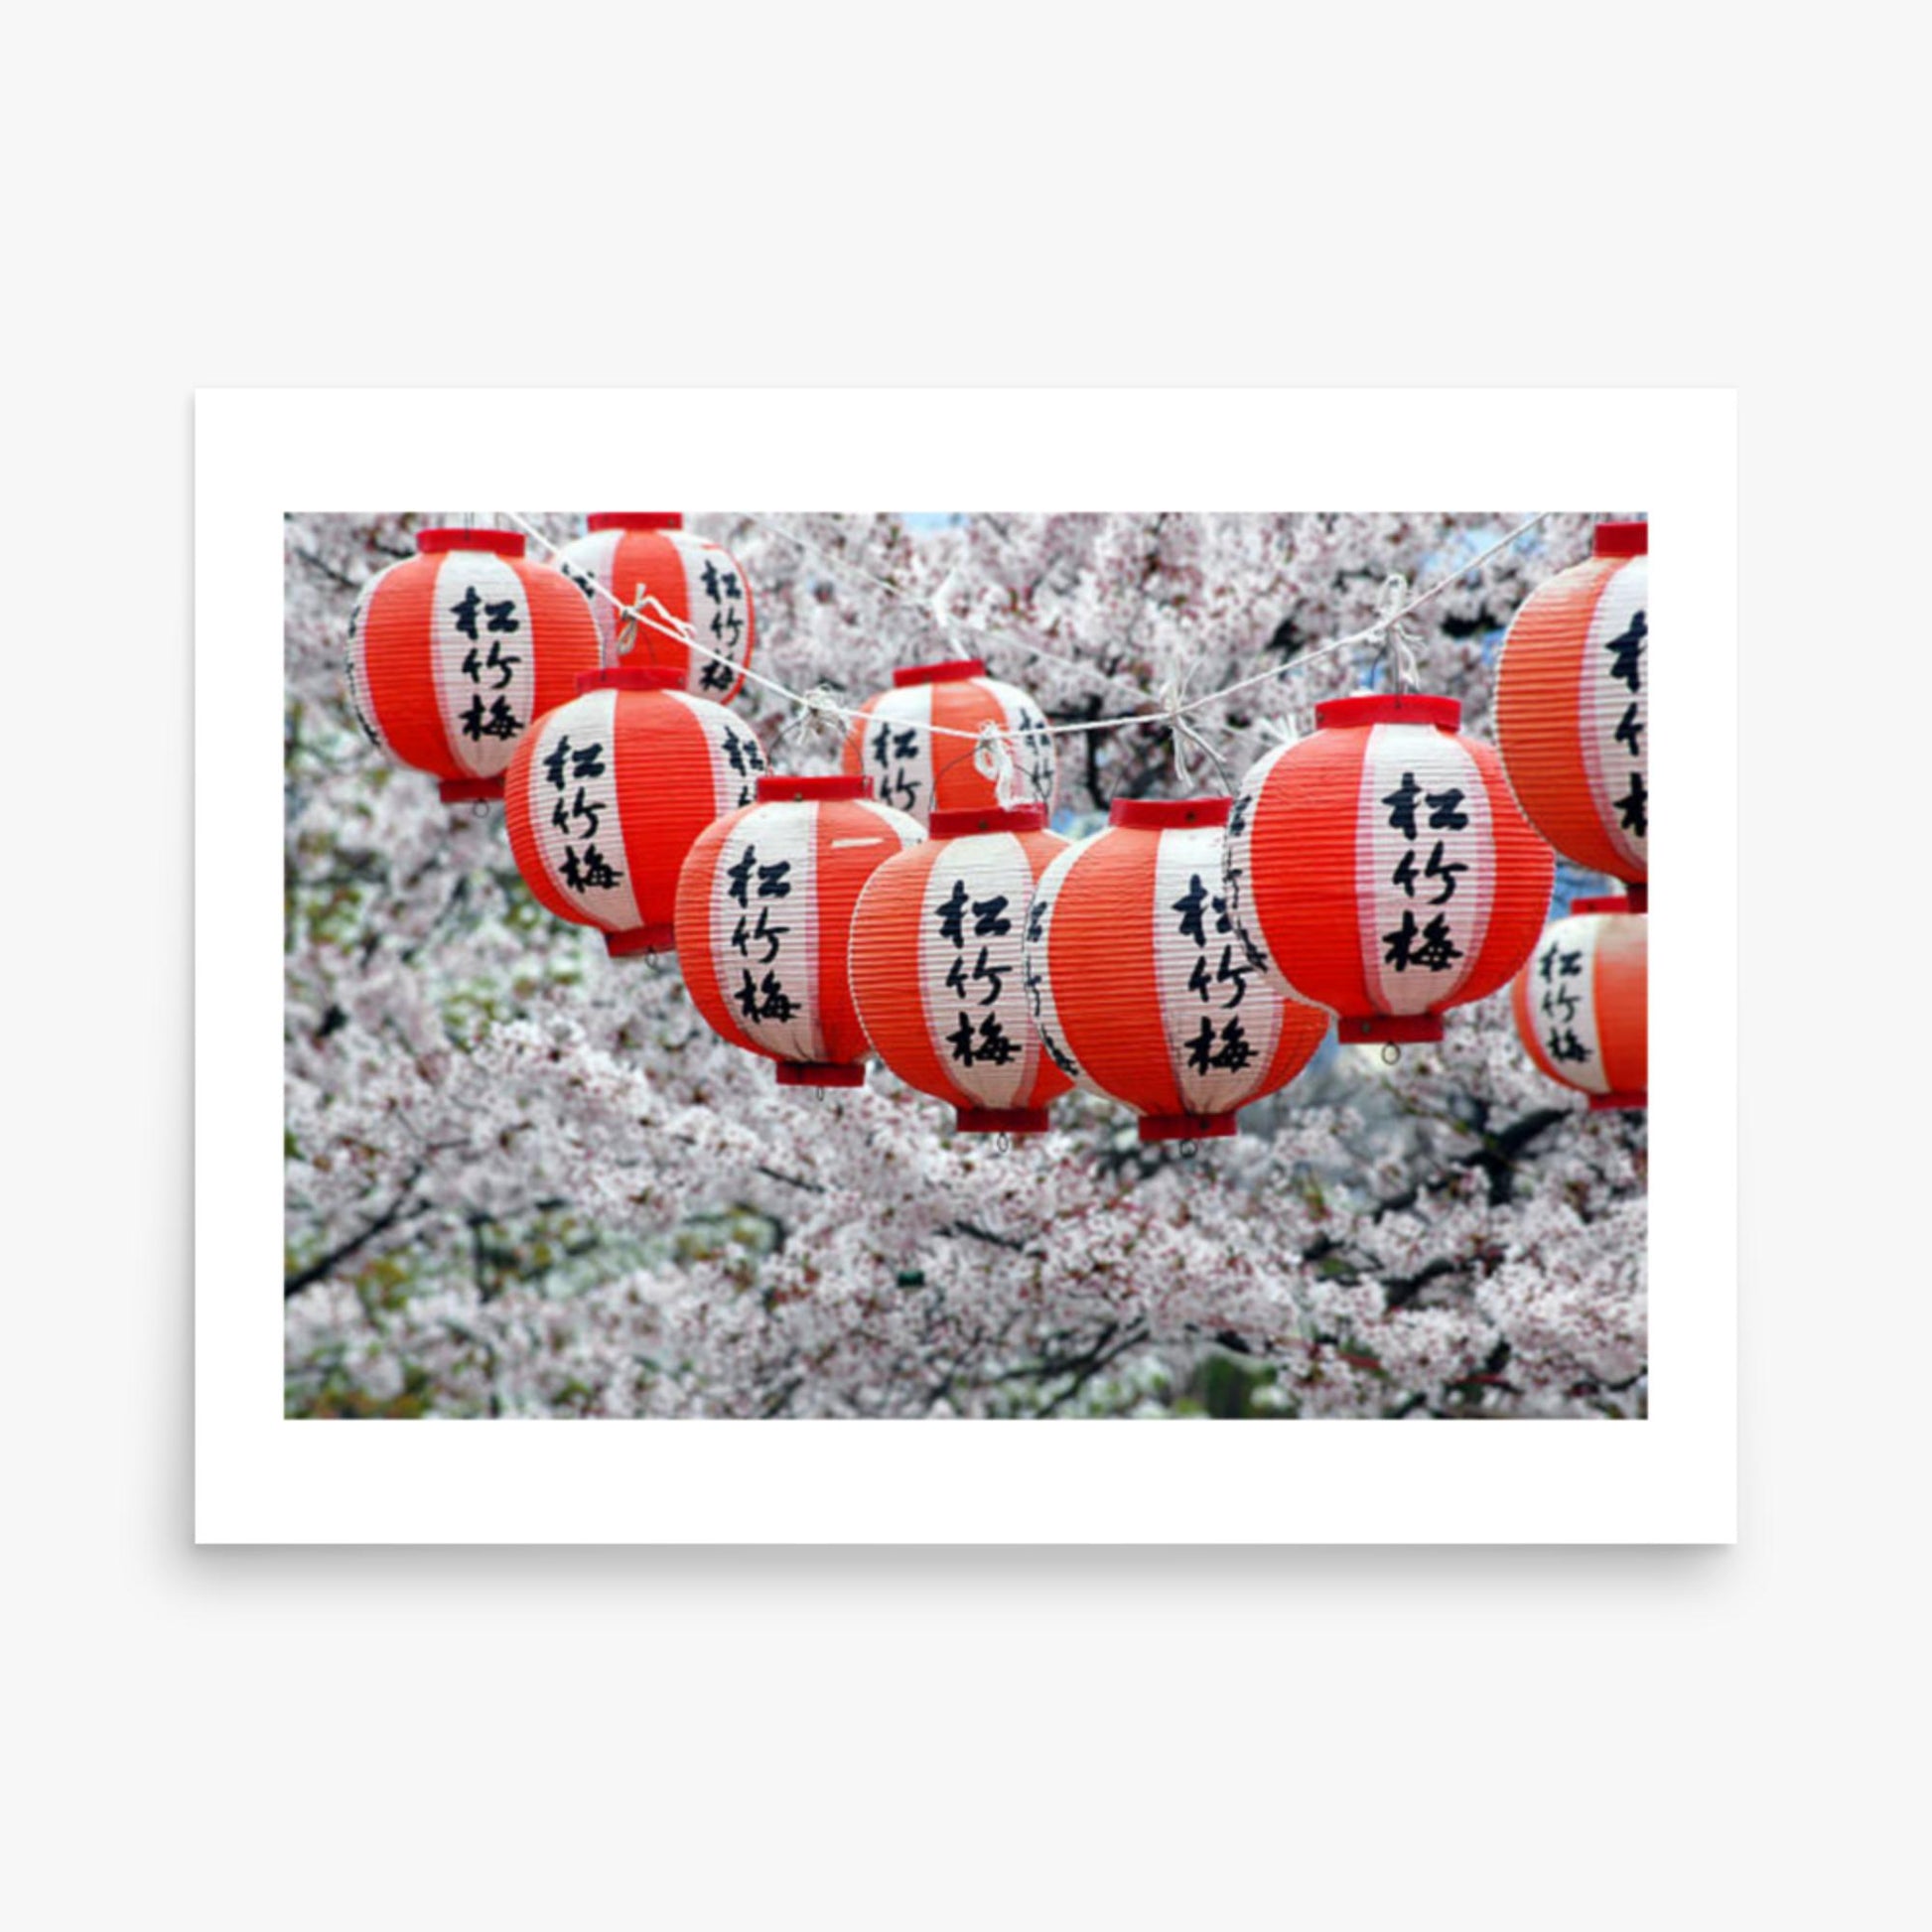 Japanese Lanterns and Cherry Blossom, Kyoto, Japan 18x24 in Poster